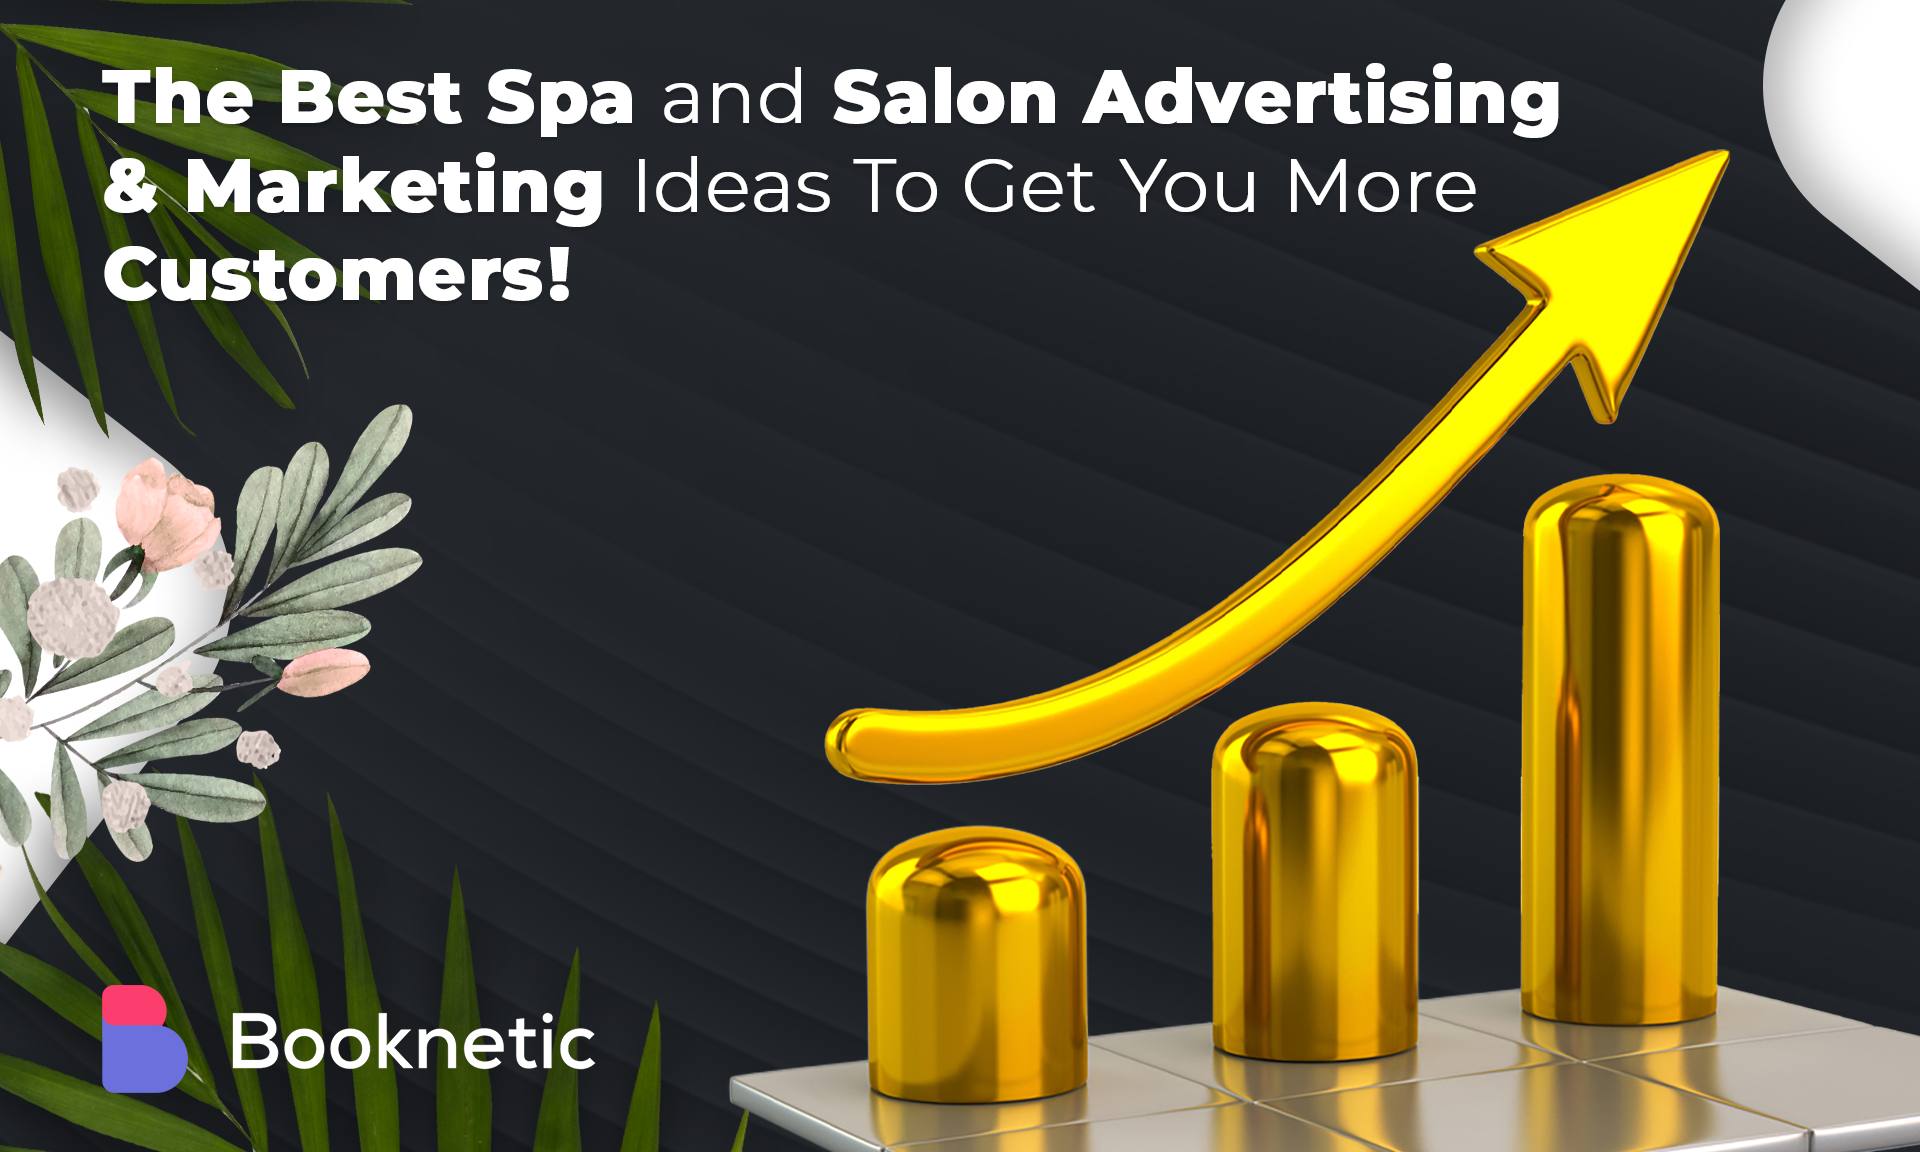 The Best Spa and Salon Advertising & Marketing Ideas